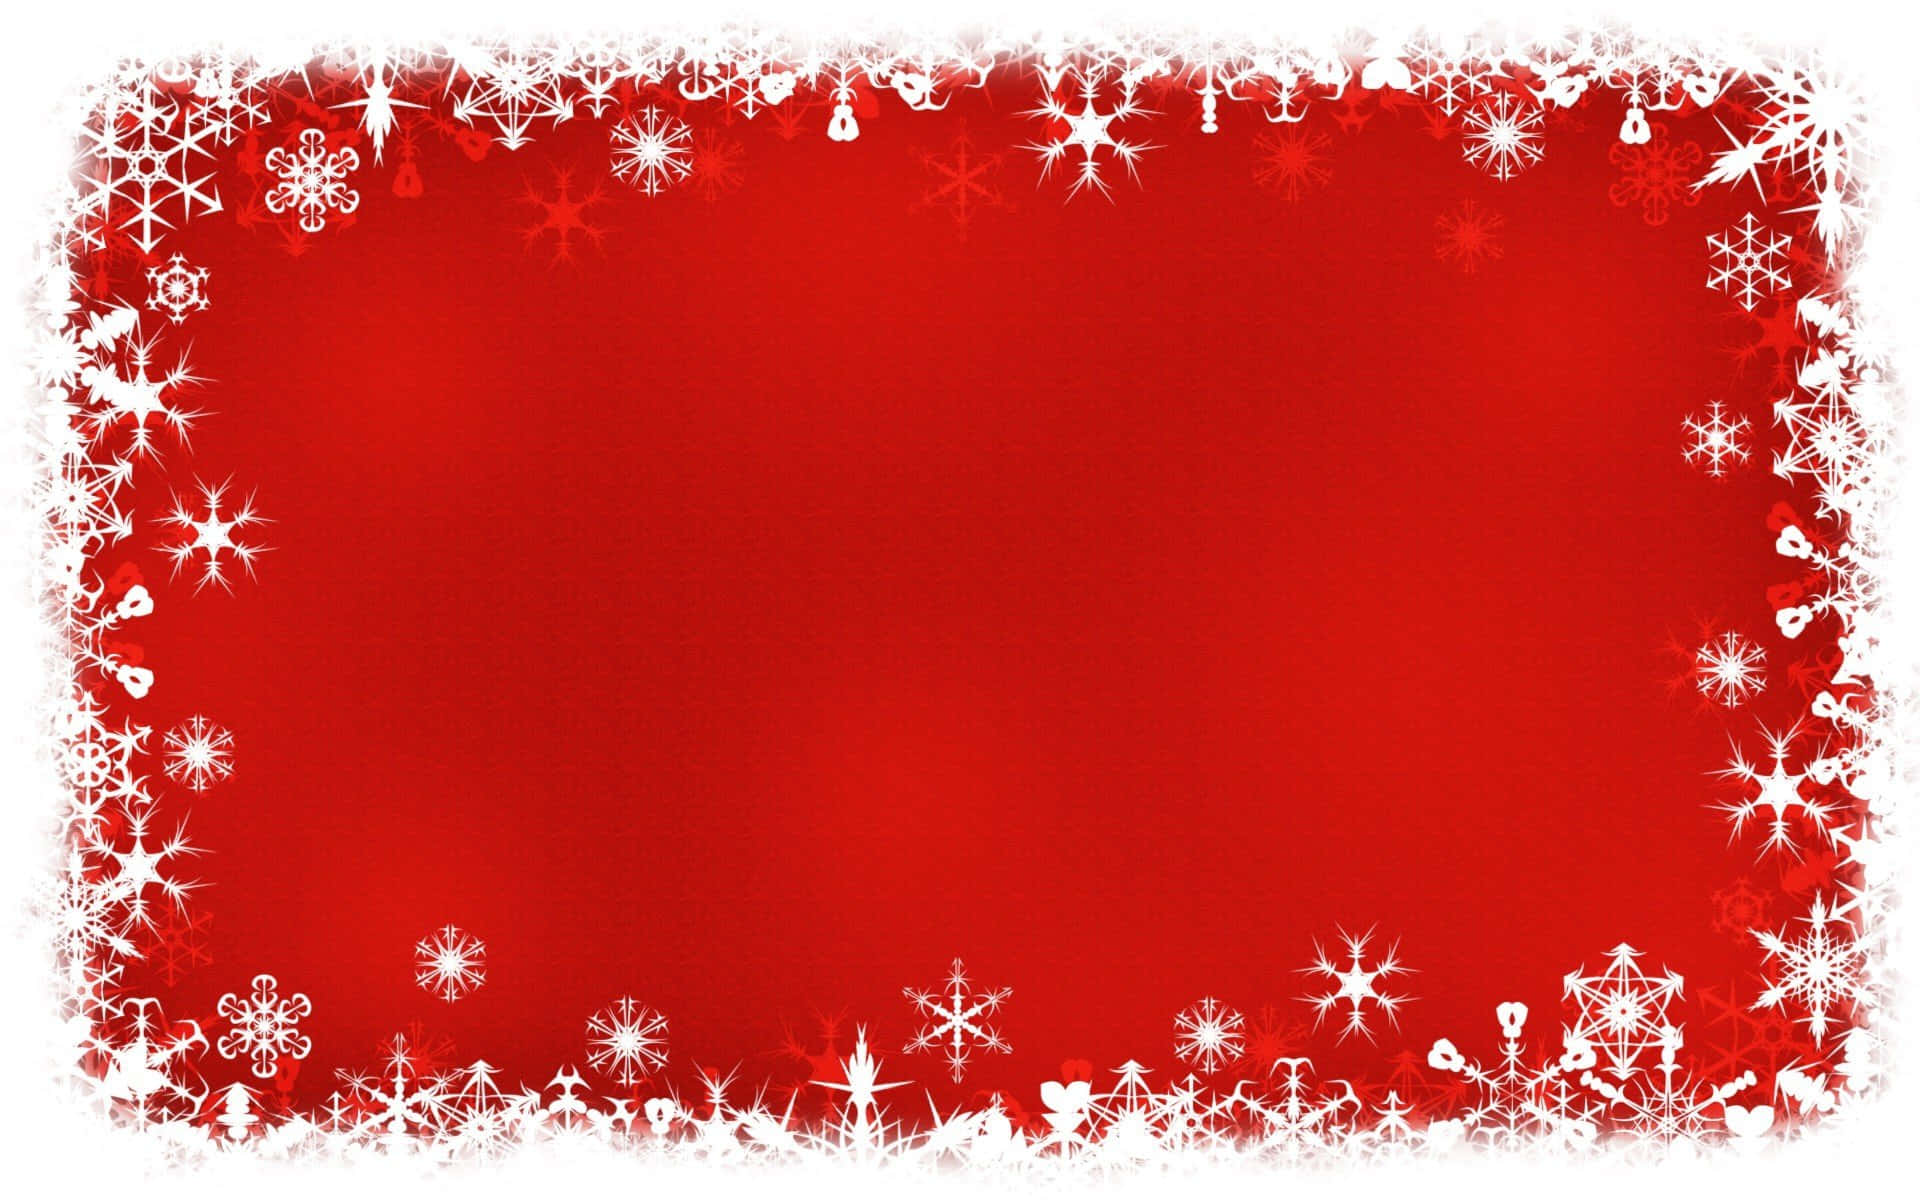 A festive Christmas Powerpoint background with lights, snow and ornaments.